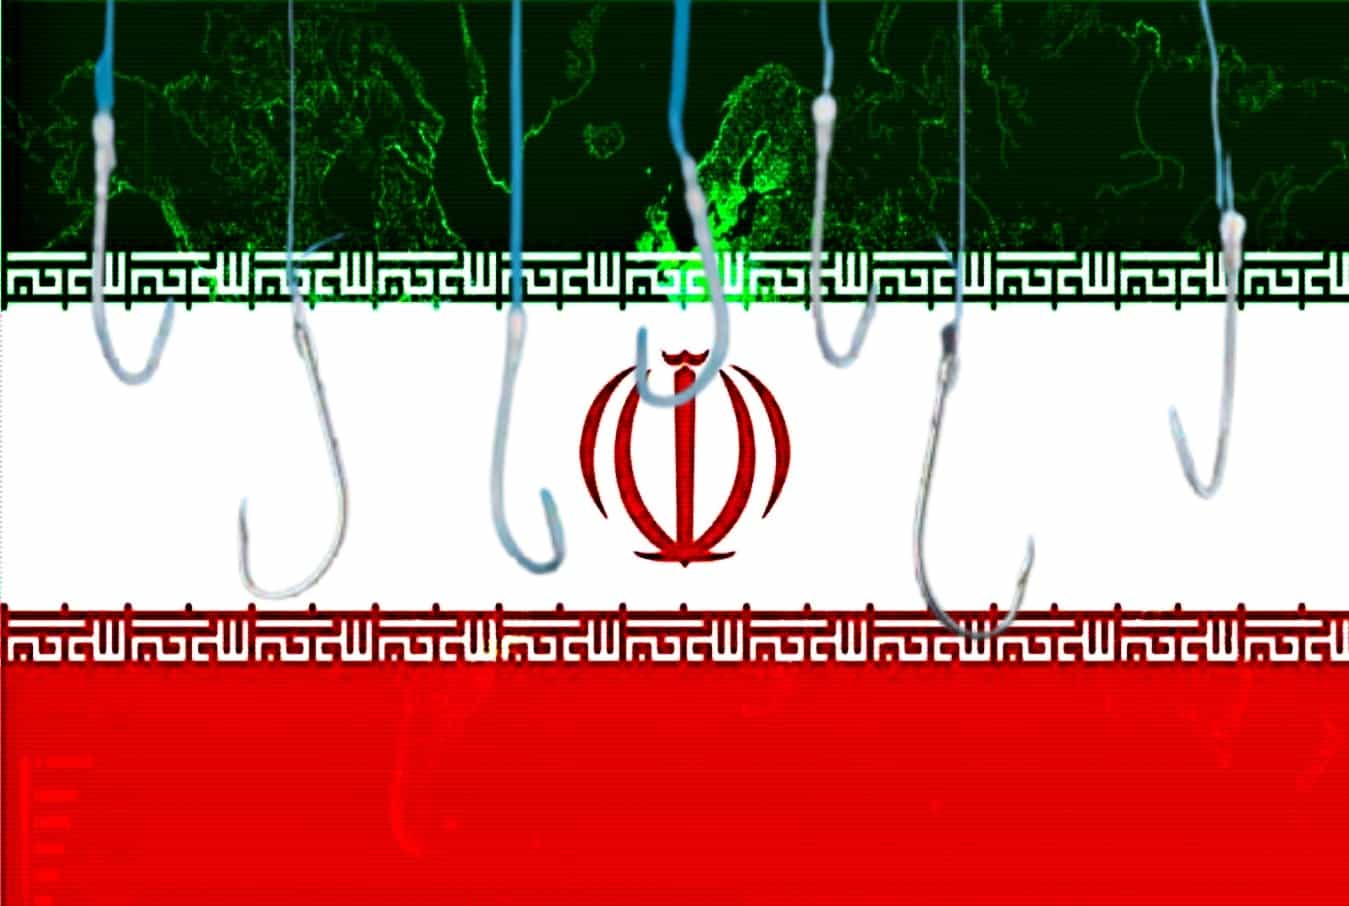 Iranian APT group hits schools, colleges in global spear-phishing attacks